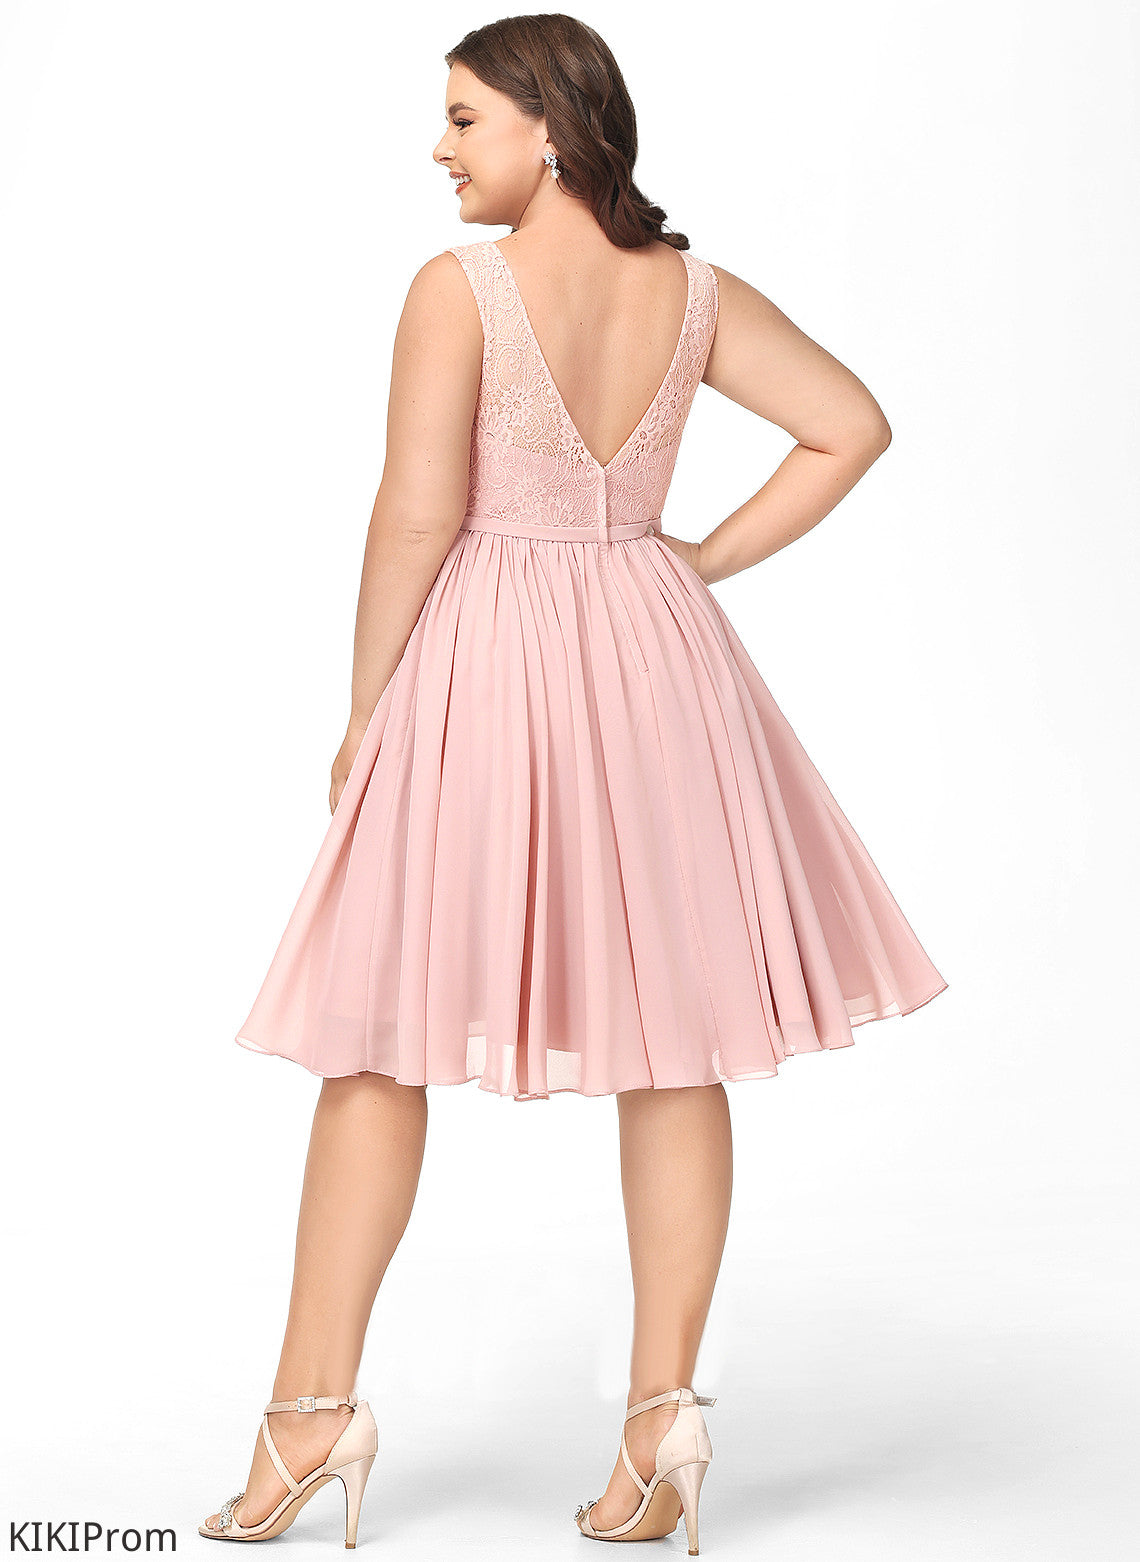 Isabell Bow(s) Dress Cocktail V-neck Lace With Knee-Length A-Line Chiffon Cocktail Dresses Lace